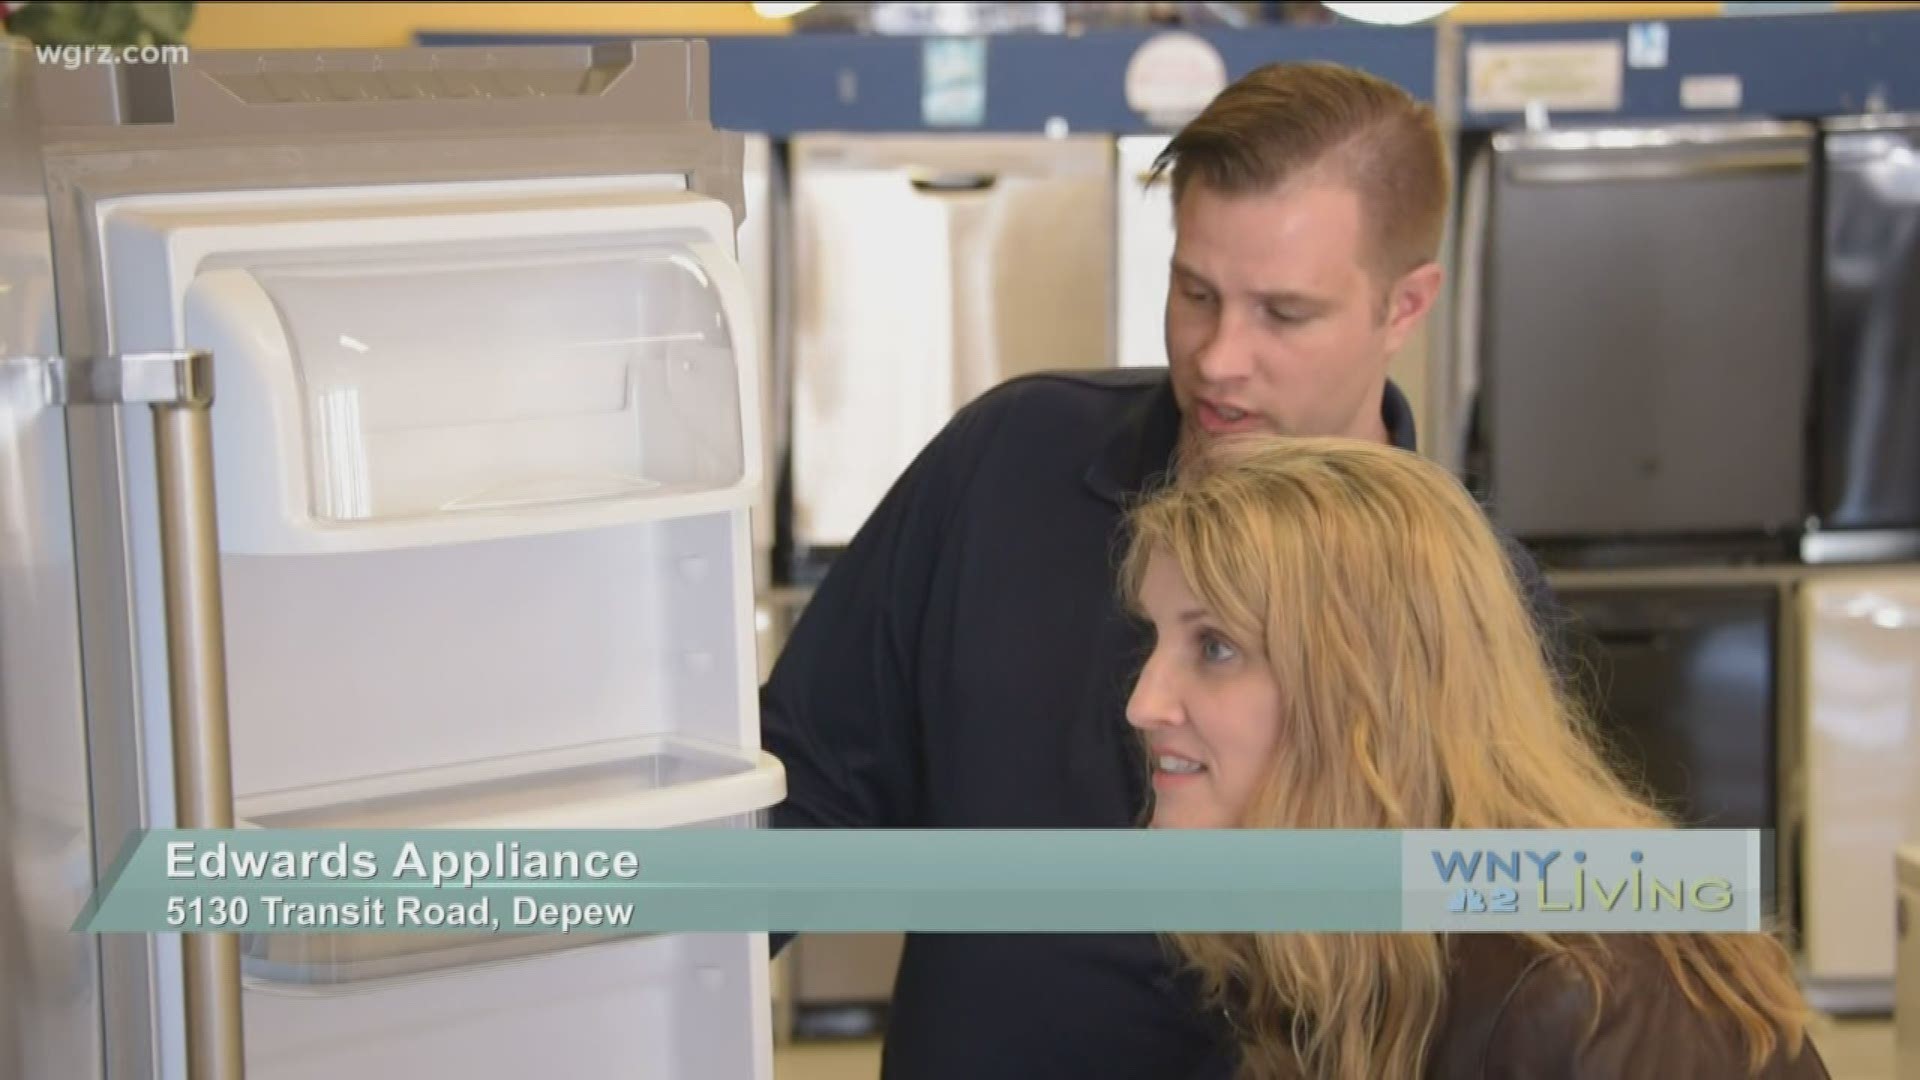 November 23 - Edwards Appliances (THIS VIDEO IS SPONSORED BY EDWARDS APPLIANCES)